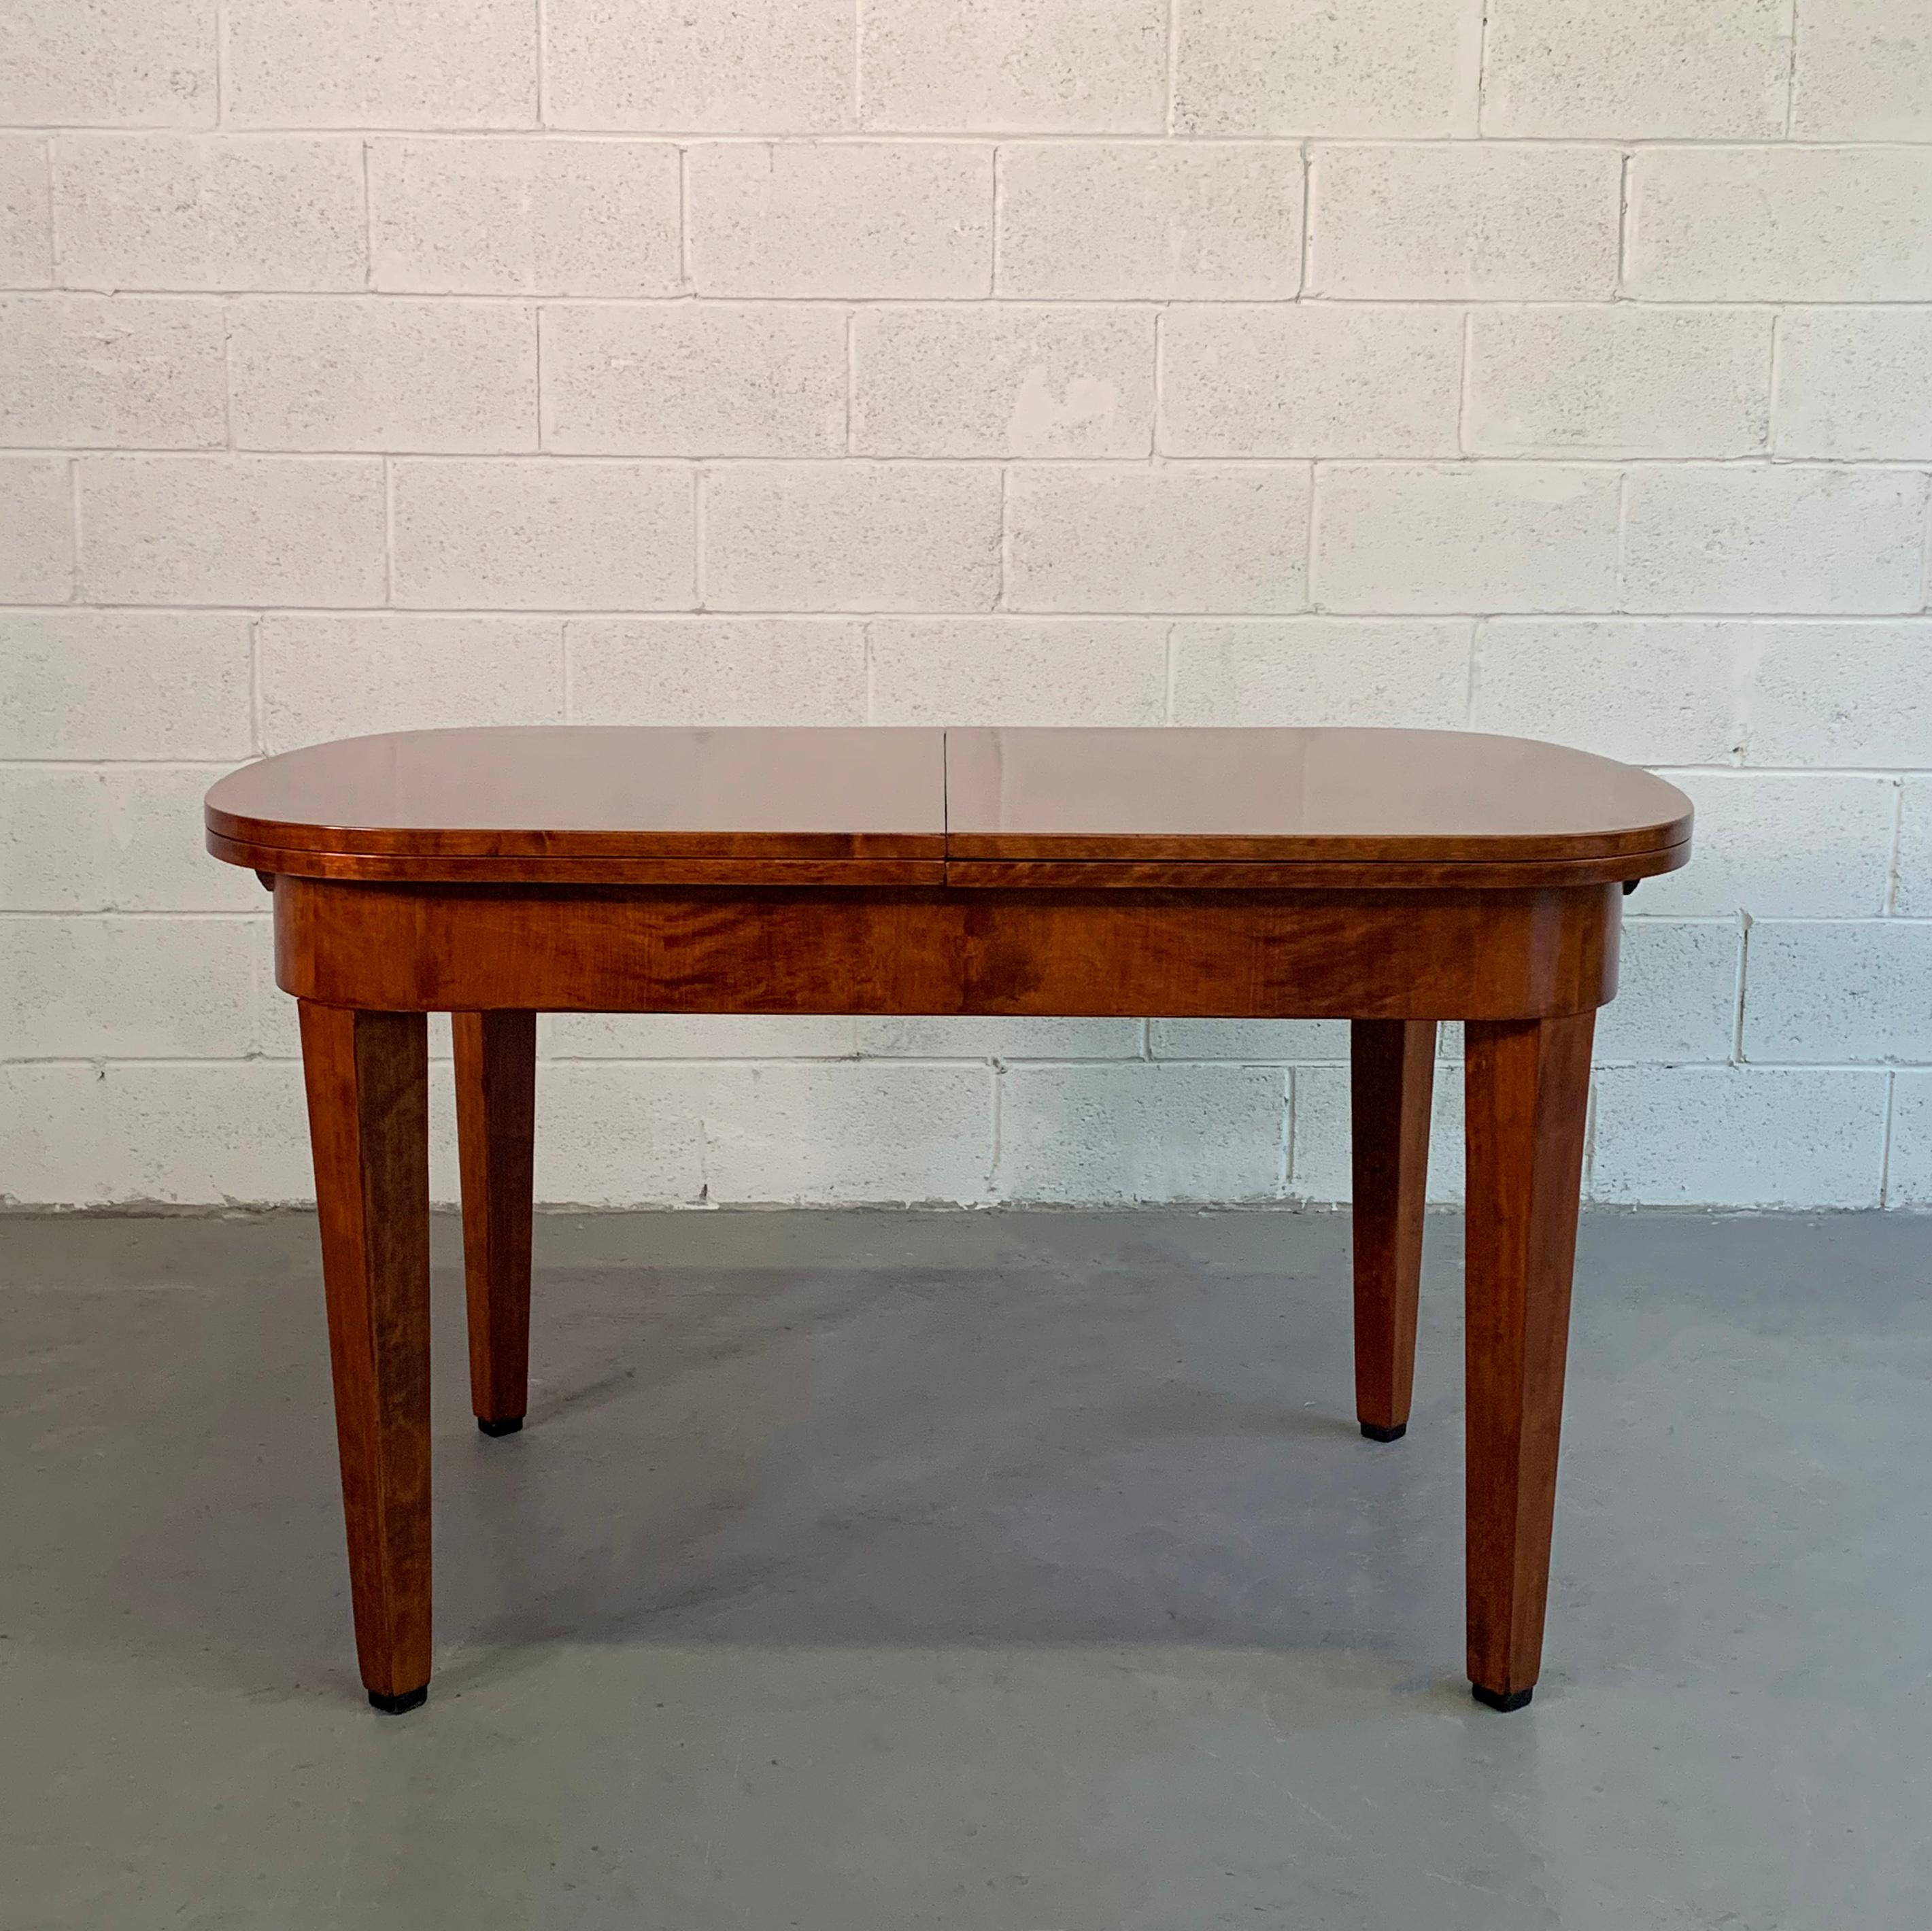 Antique, Biedermeier period, two-tone, satinwood, dining table by Ruscheweyh Tisch , Germany, features 2 leaves that tuck underneath that expand the table to 87 inches wide. The legroom height with lip is 23.25 inches.